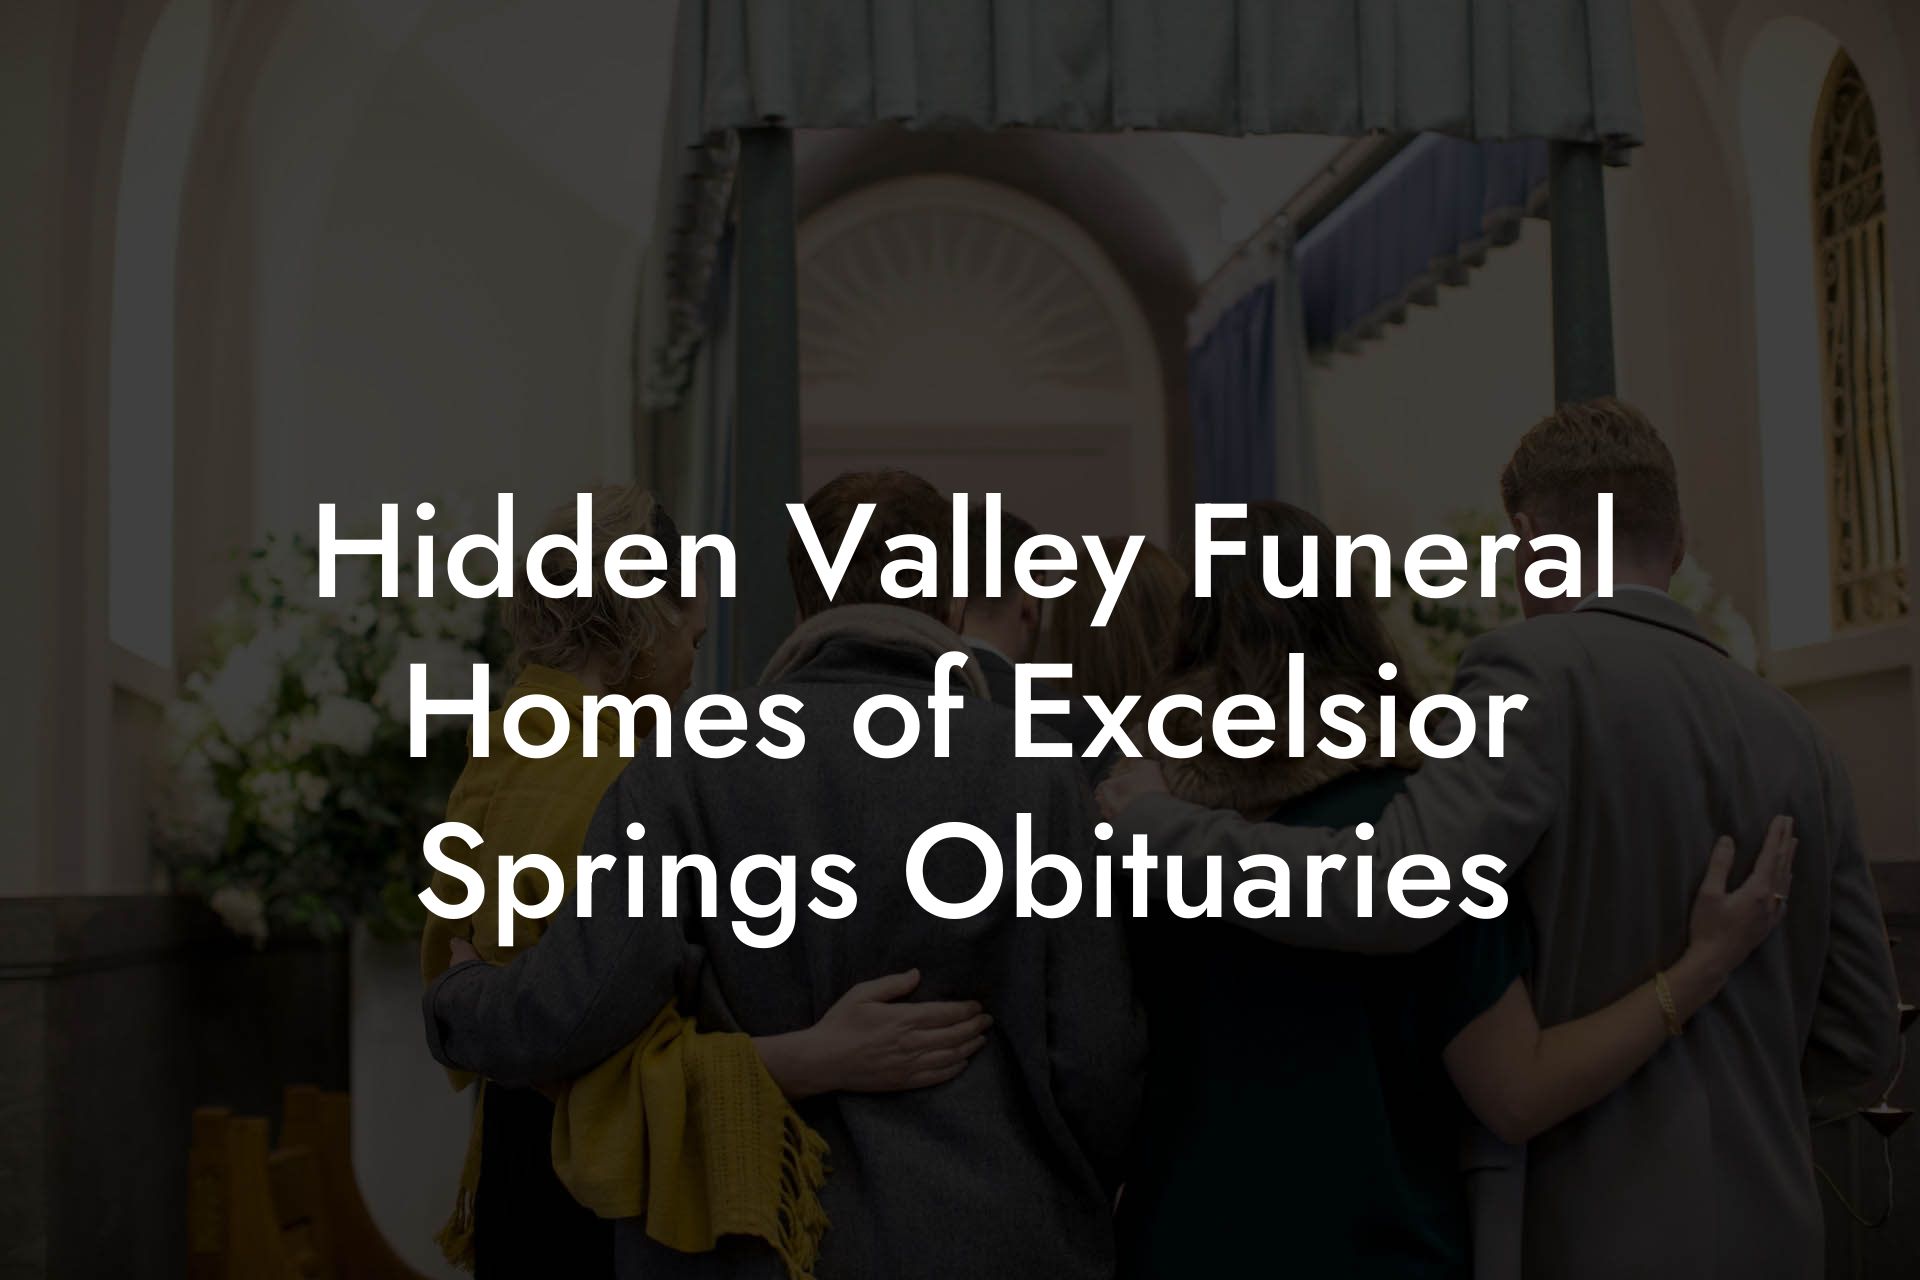 Hidden Valley Funeral Homes of Excelsior Springs Obituaries - Eulogy ...